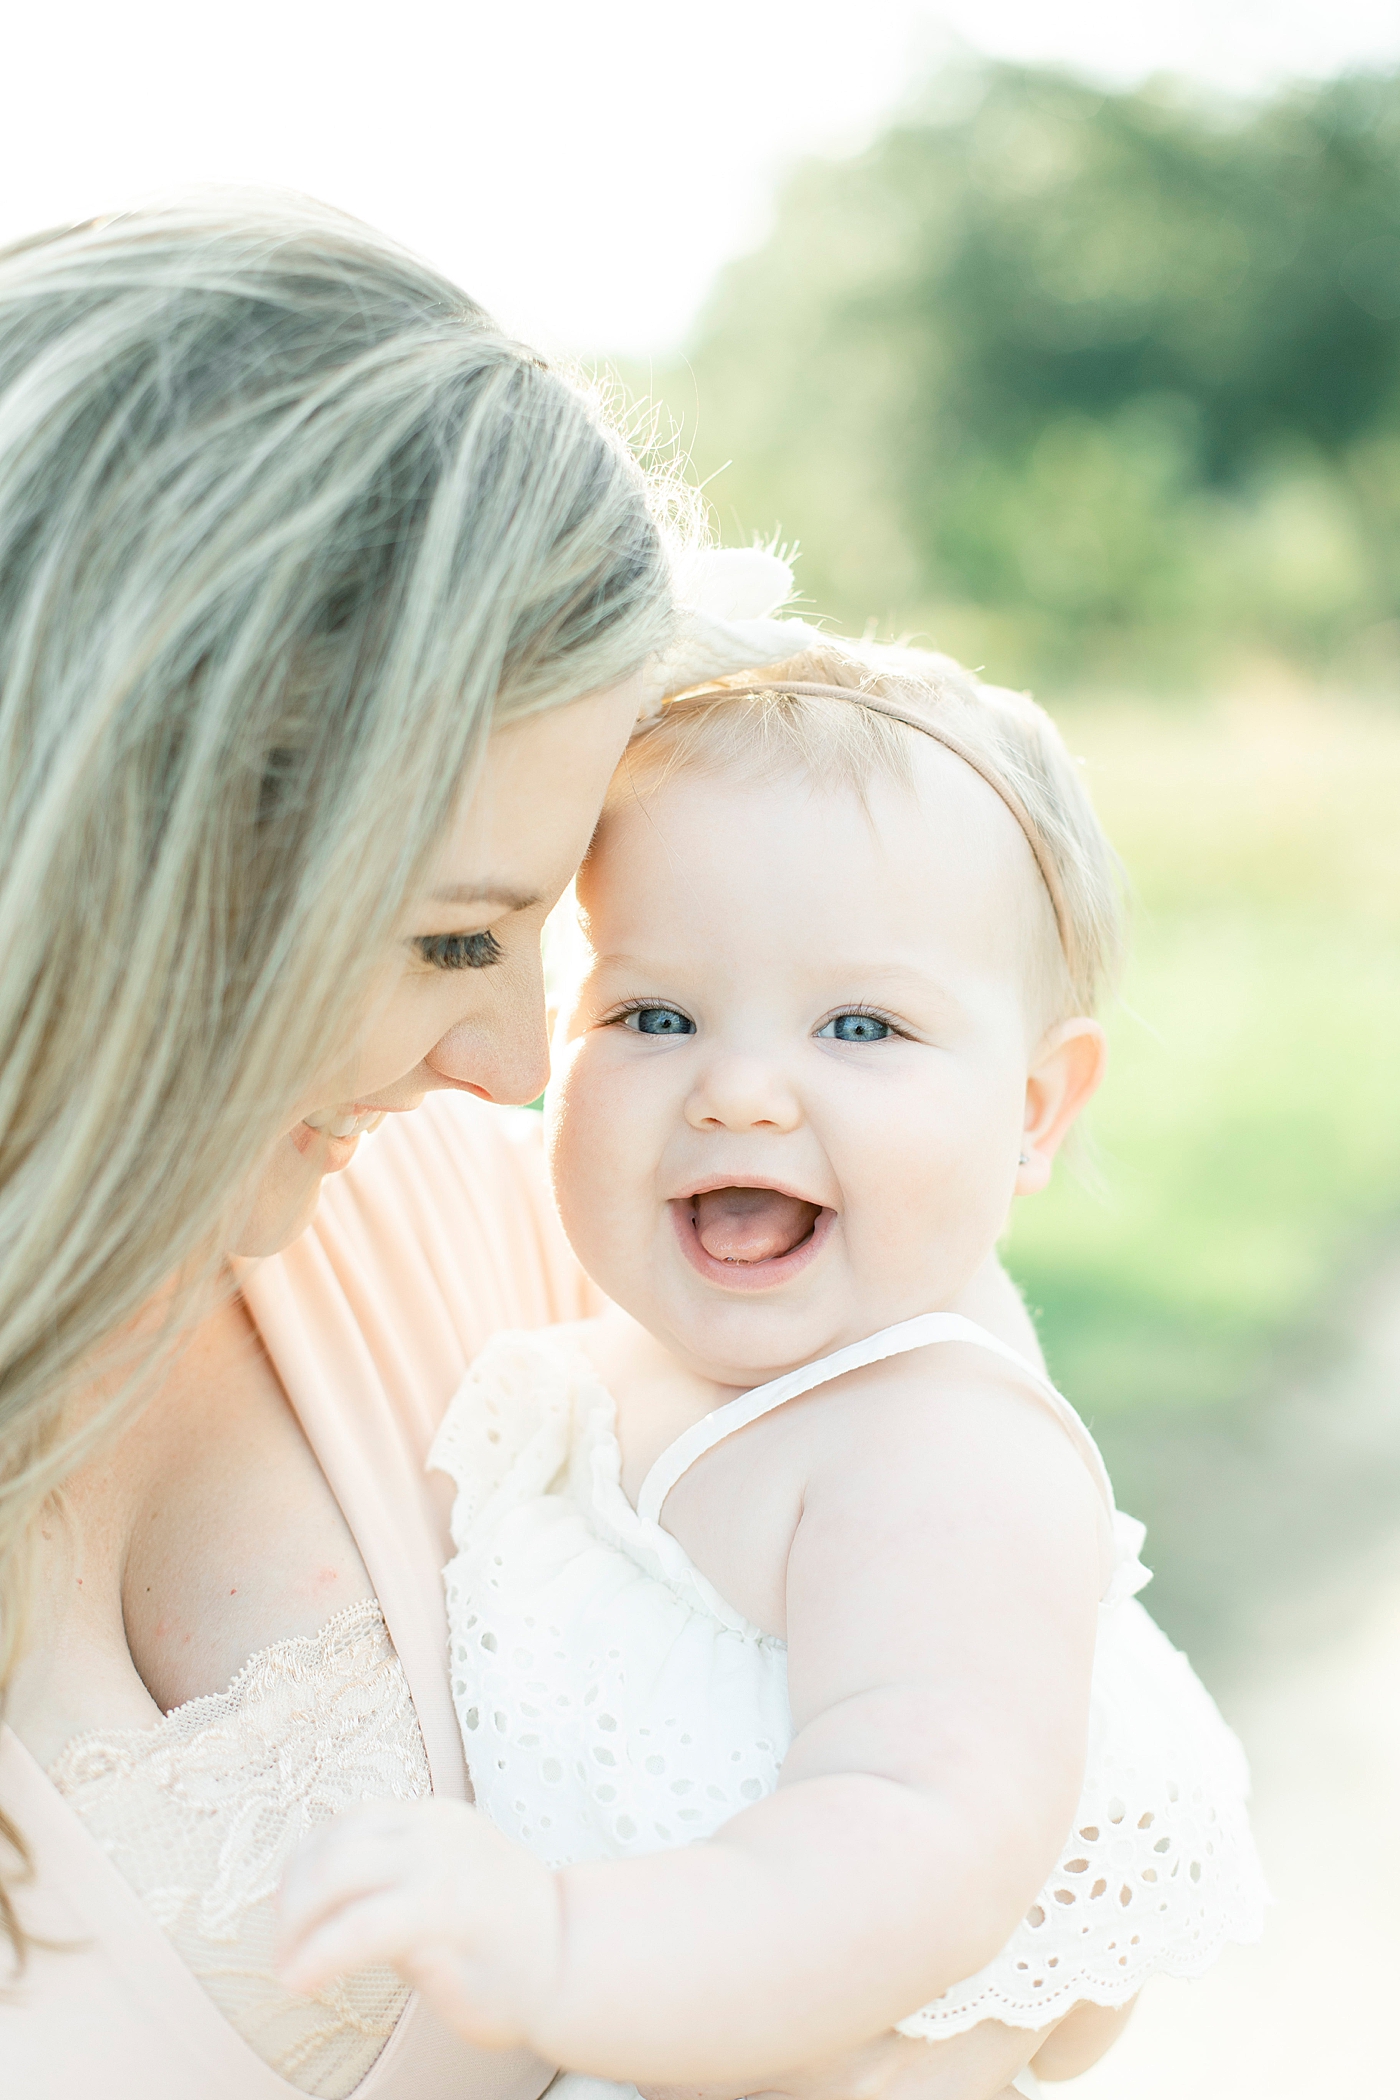 Mom snuggling with smiling baby | Photo by Hattiesburg MS family photographer Little Sunshine Photography 